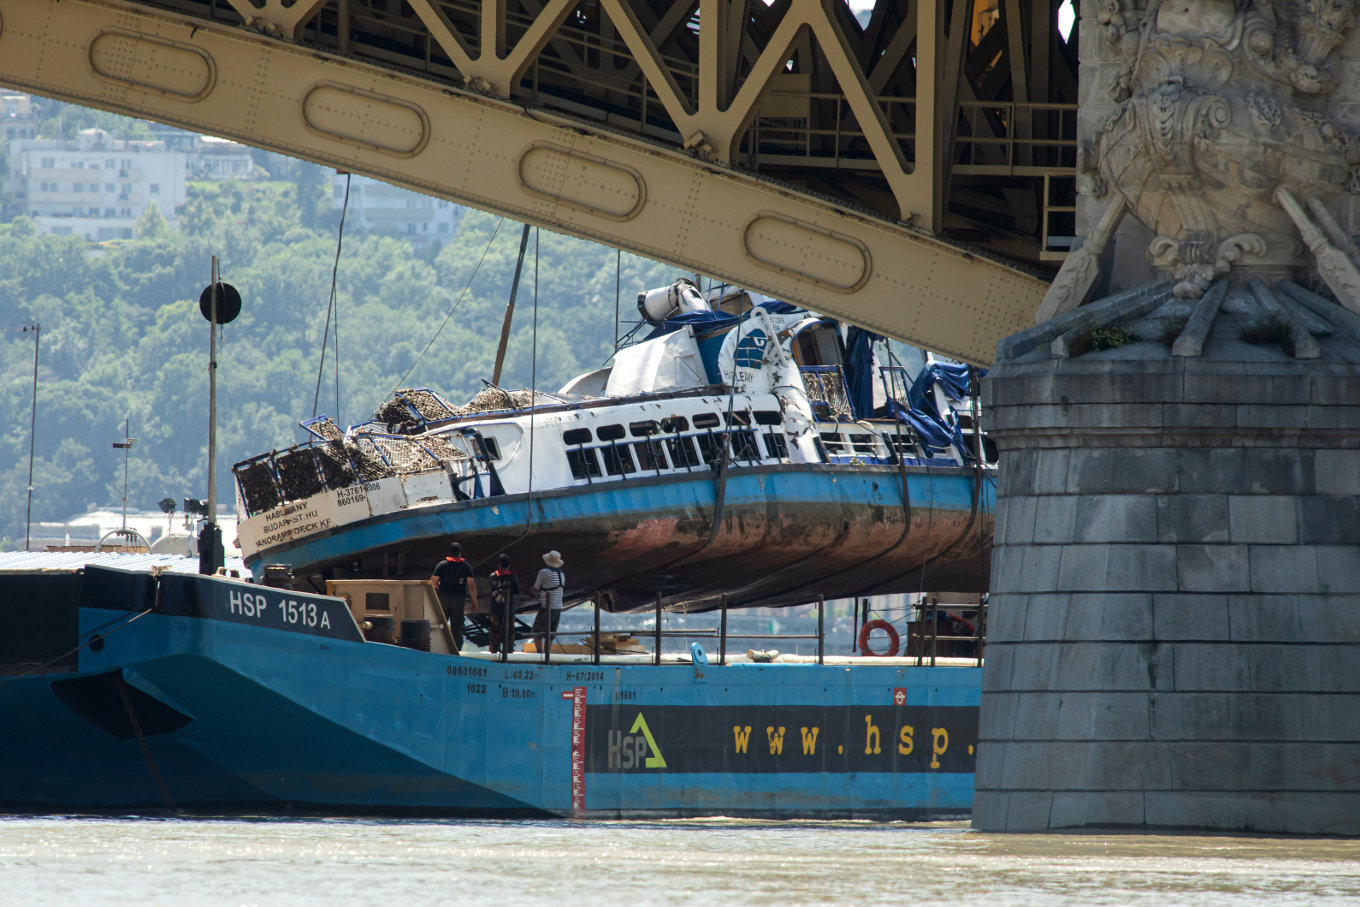 Video: Wreck Of Sightseeing Boat Raised In Budapest - Timelapse Film Shows Recovery